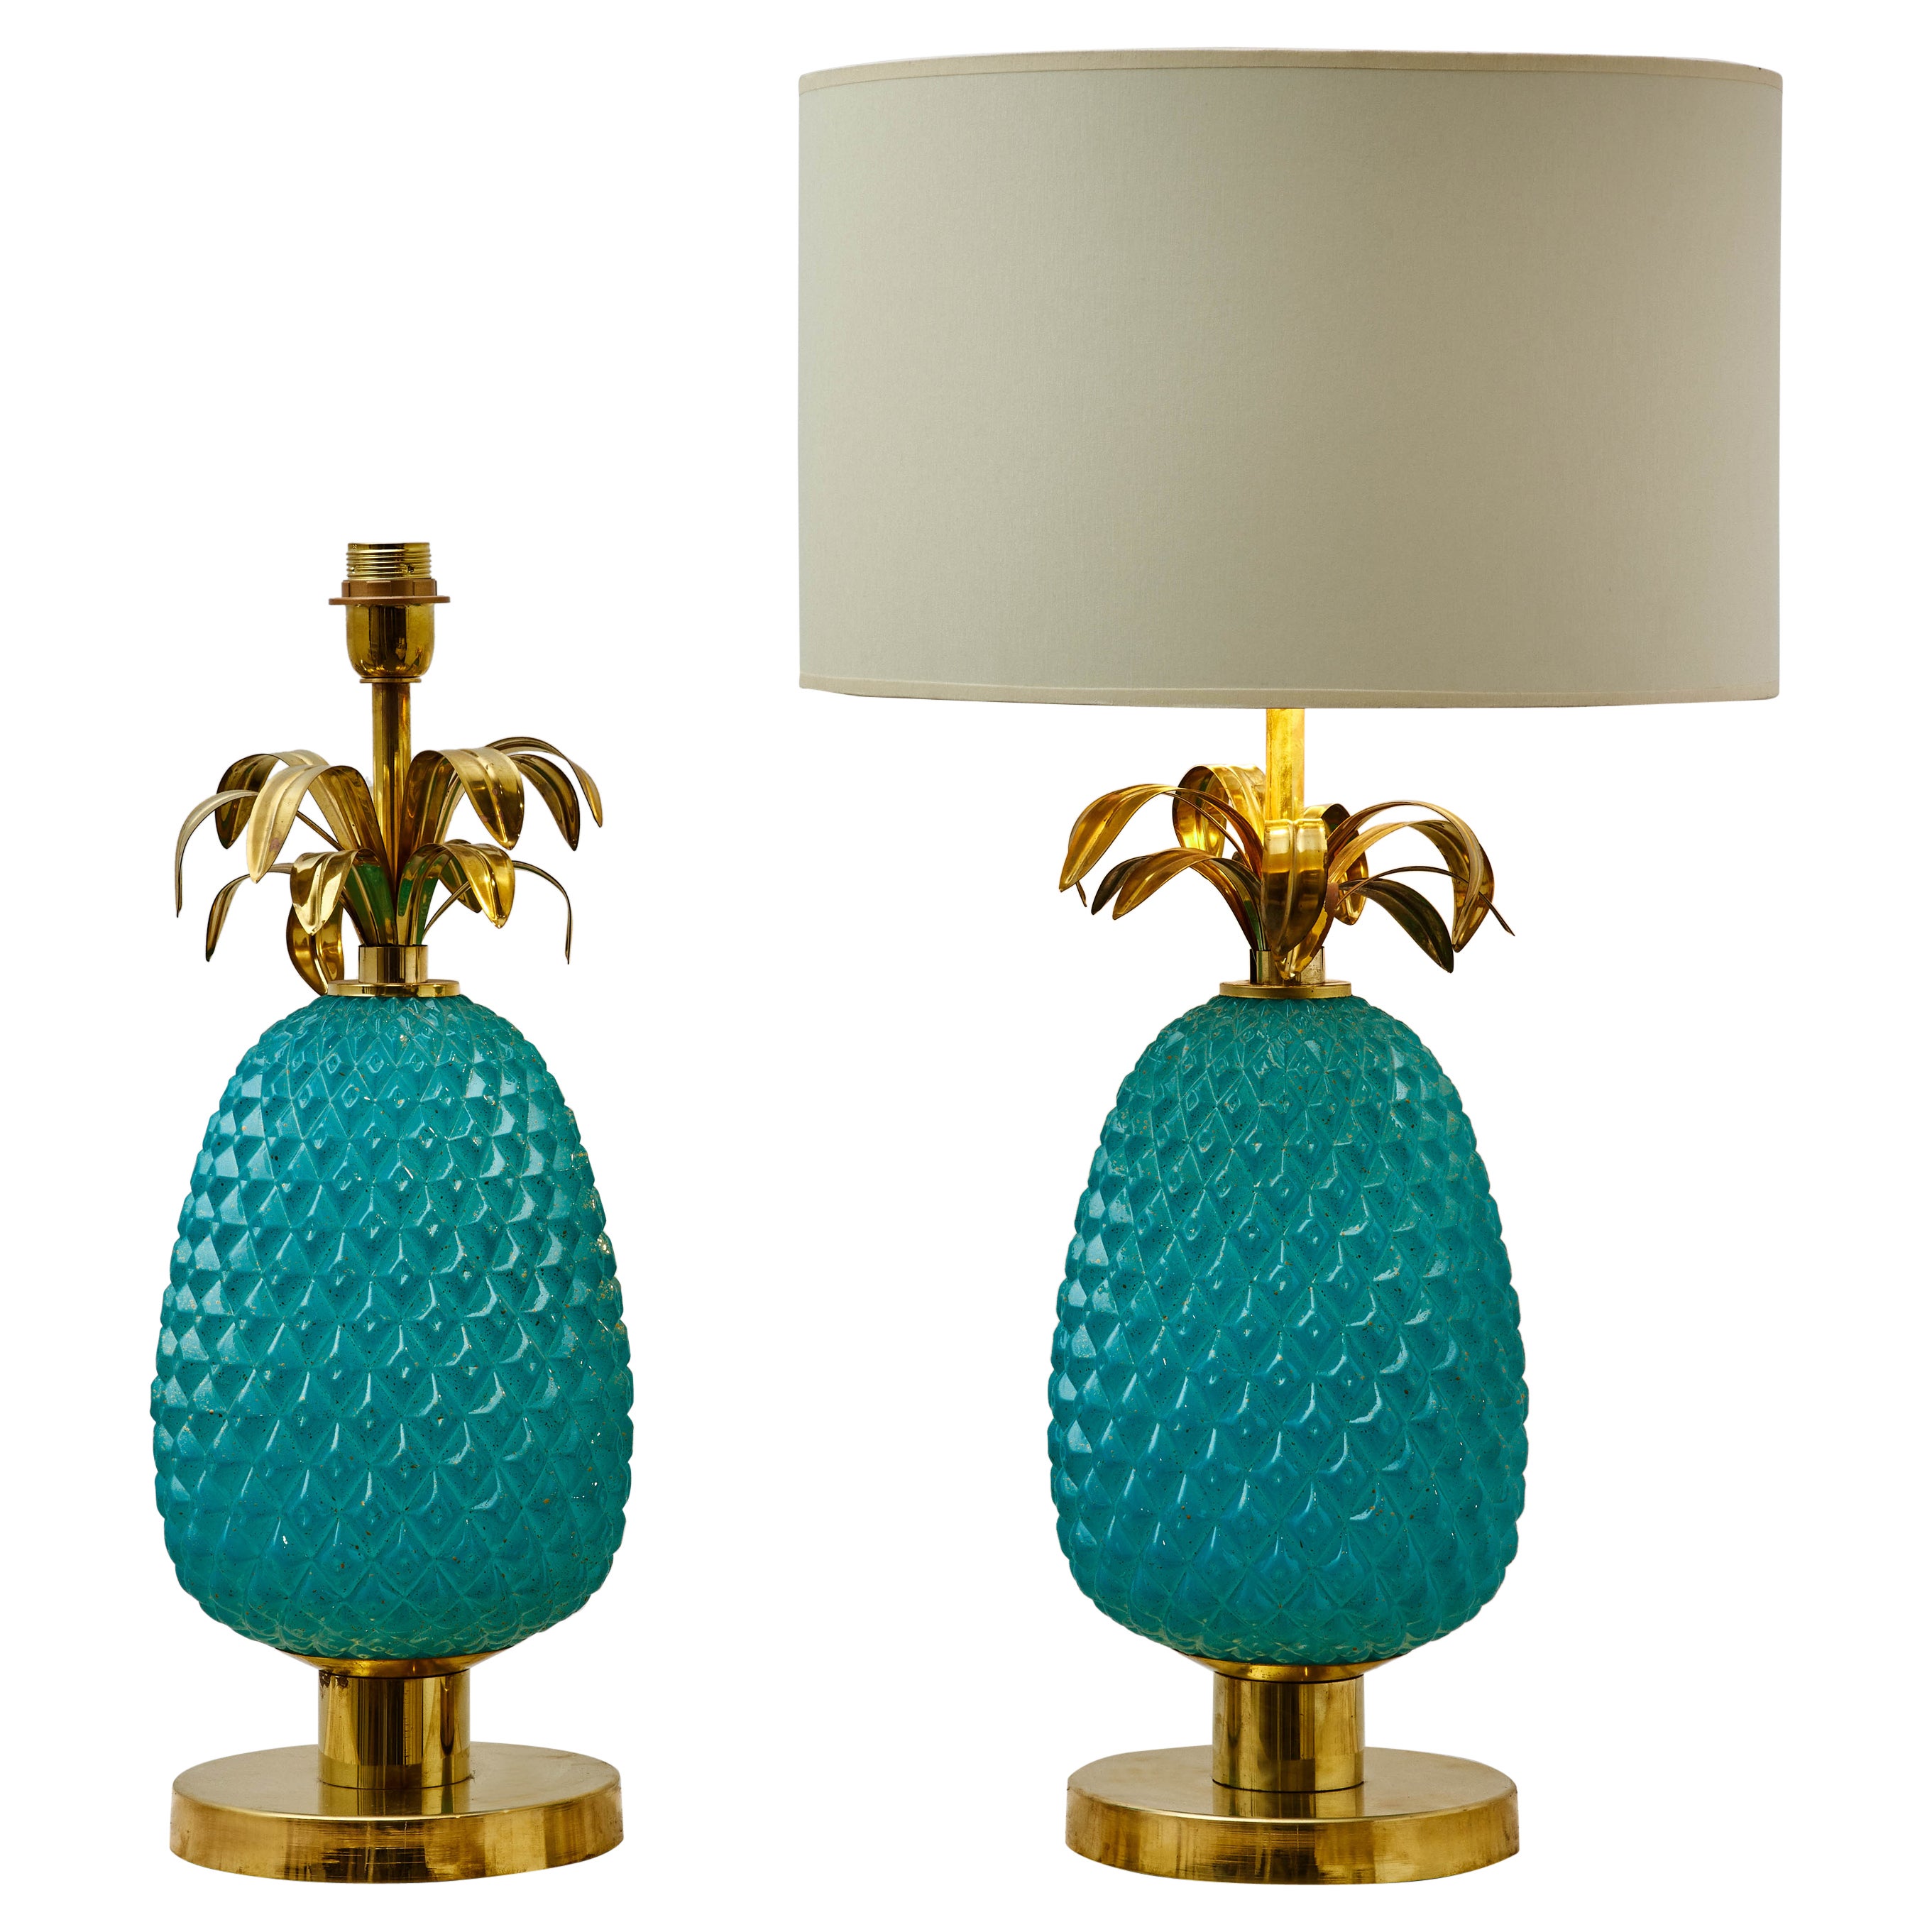 "Pineapple" Table Lamps at Cost Price